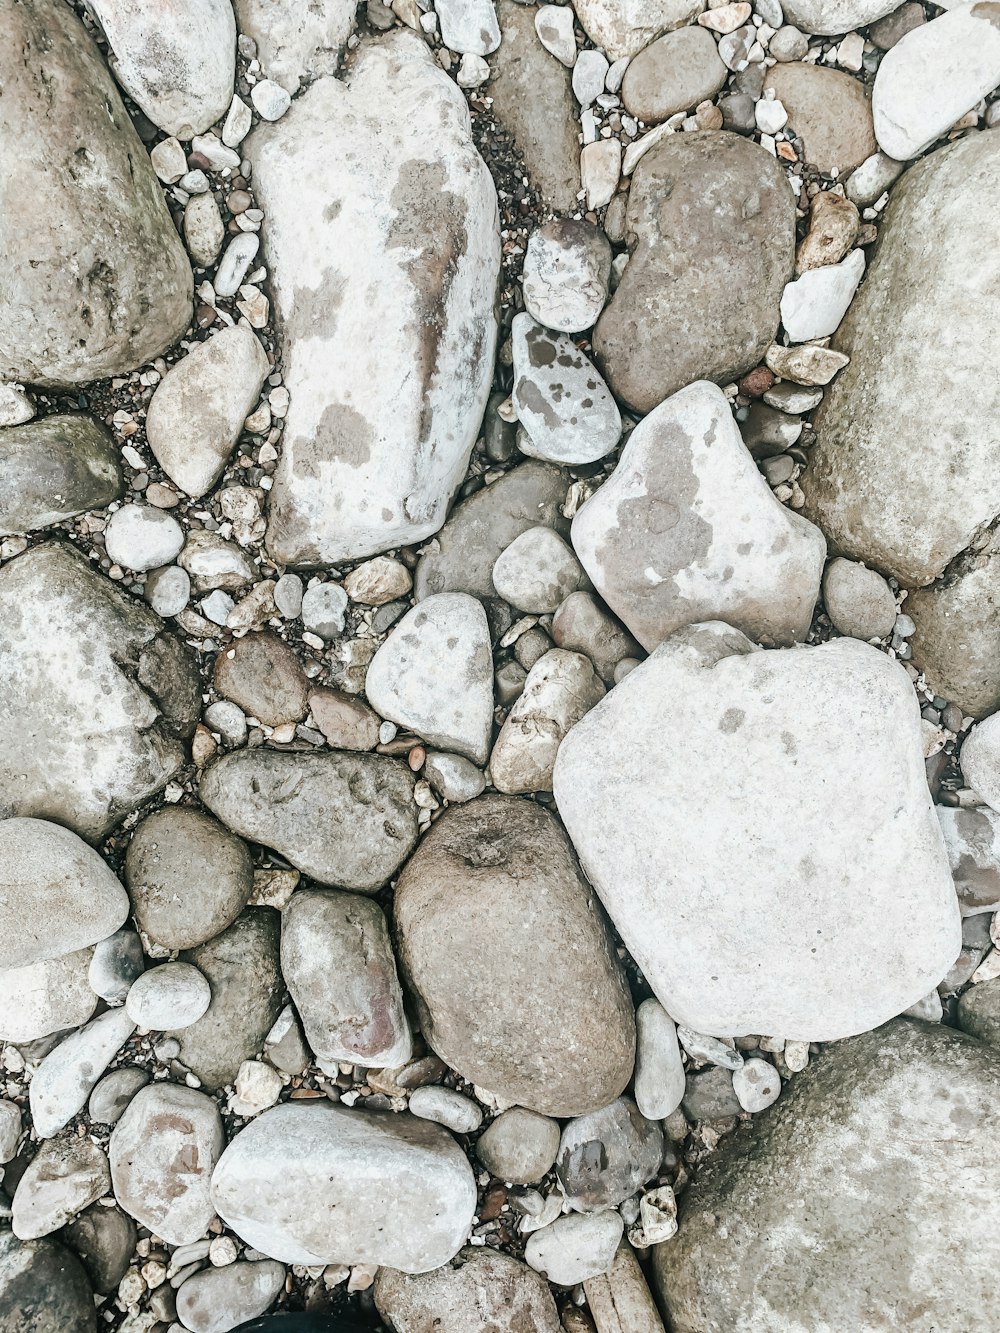 white and brown stone fragments